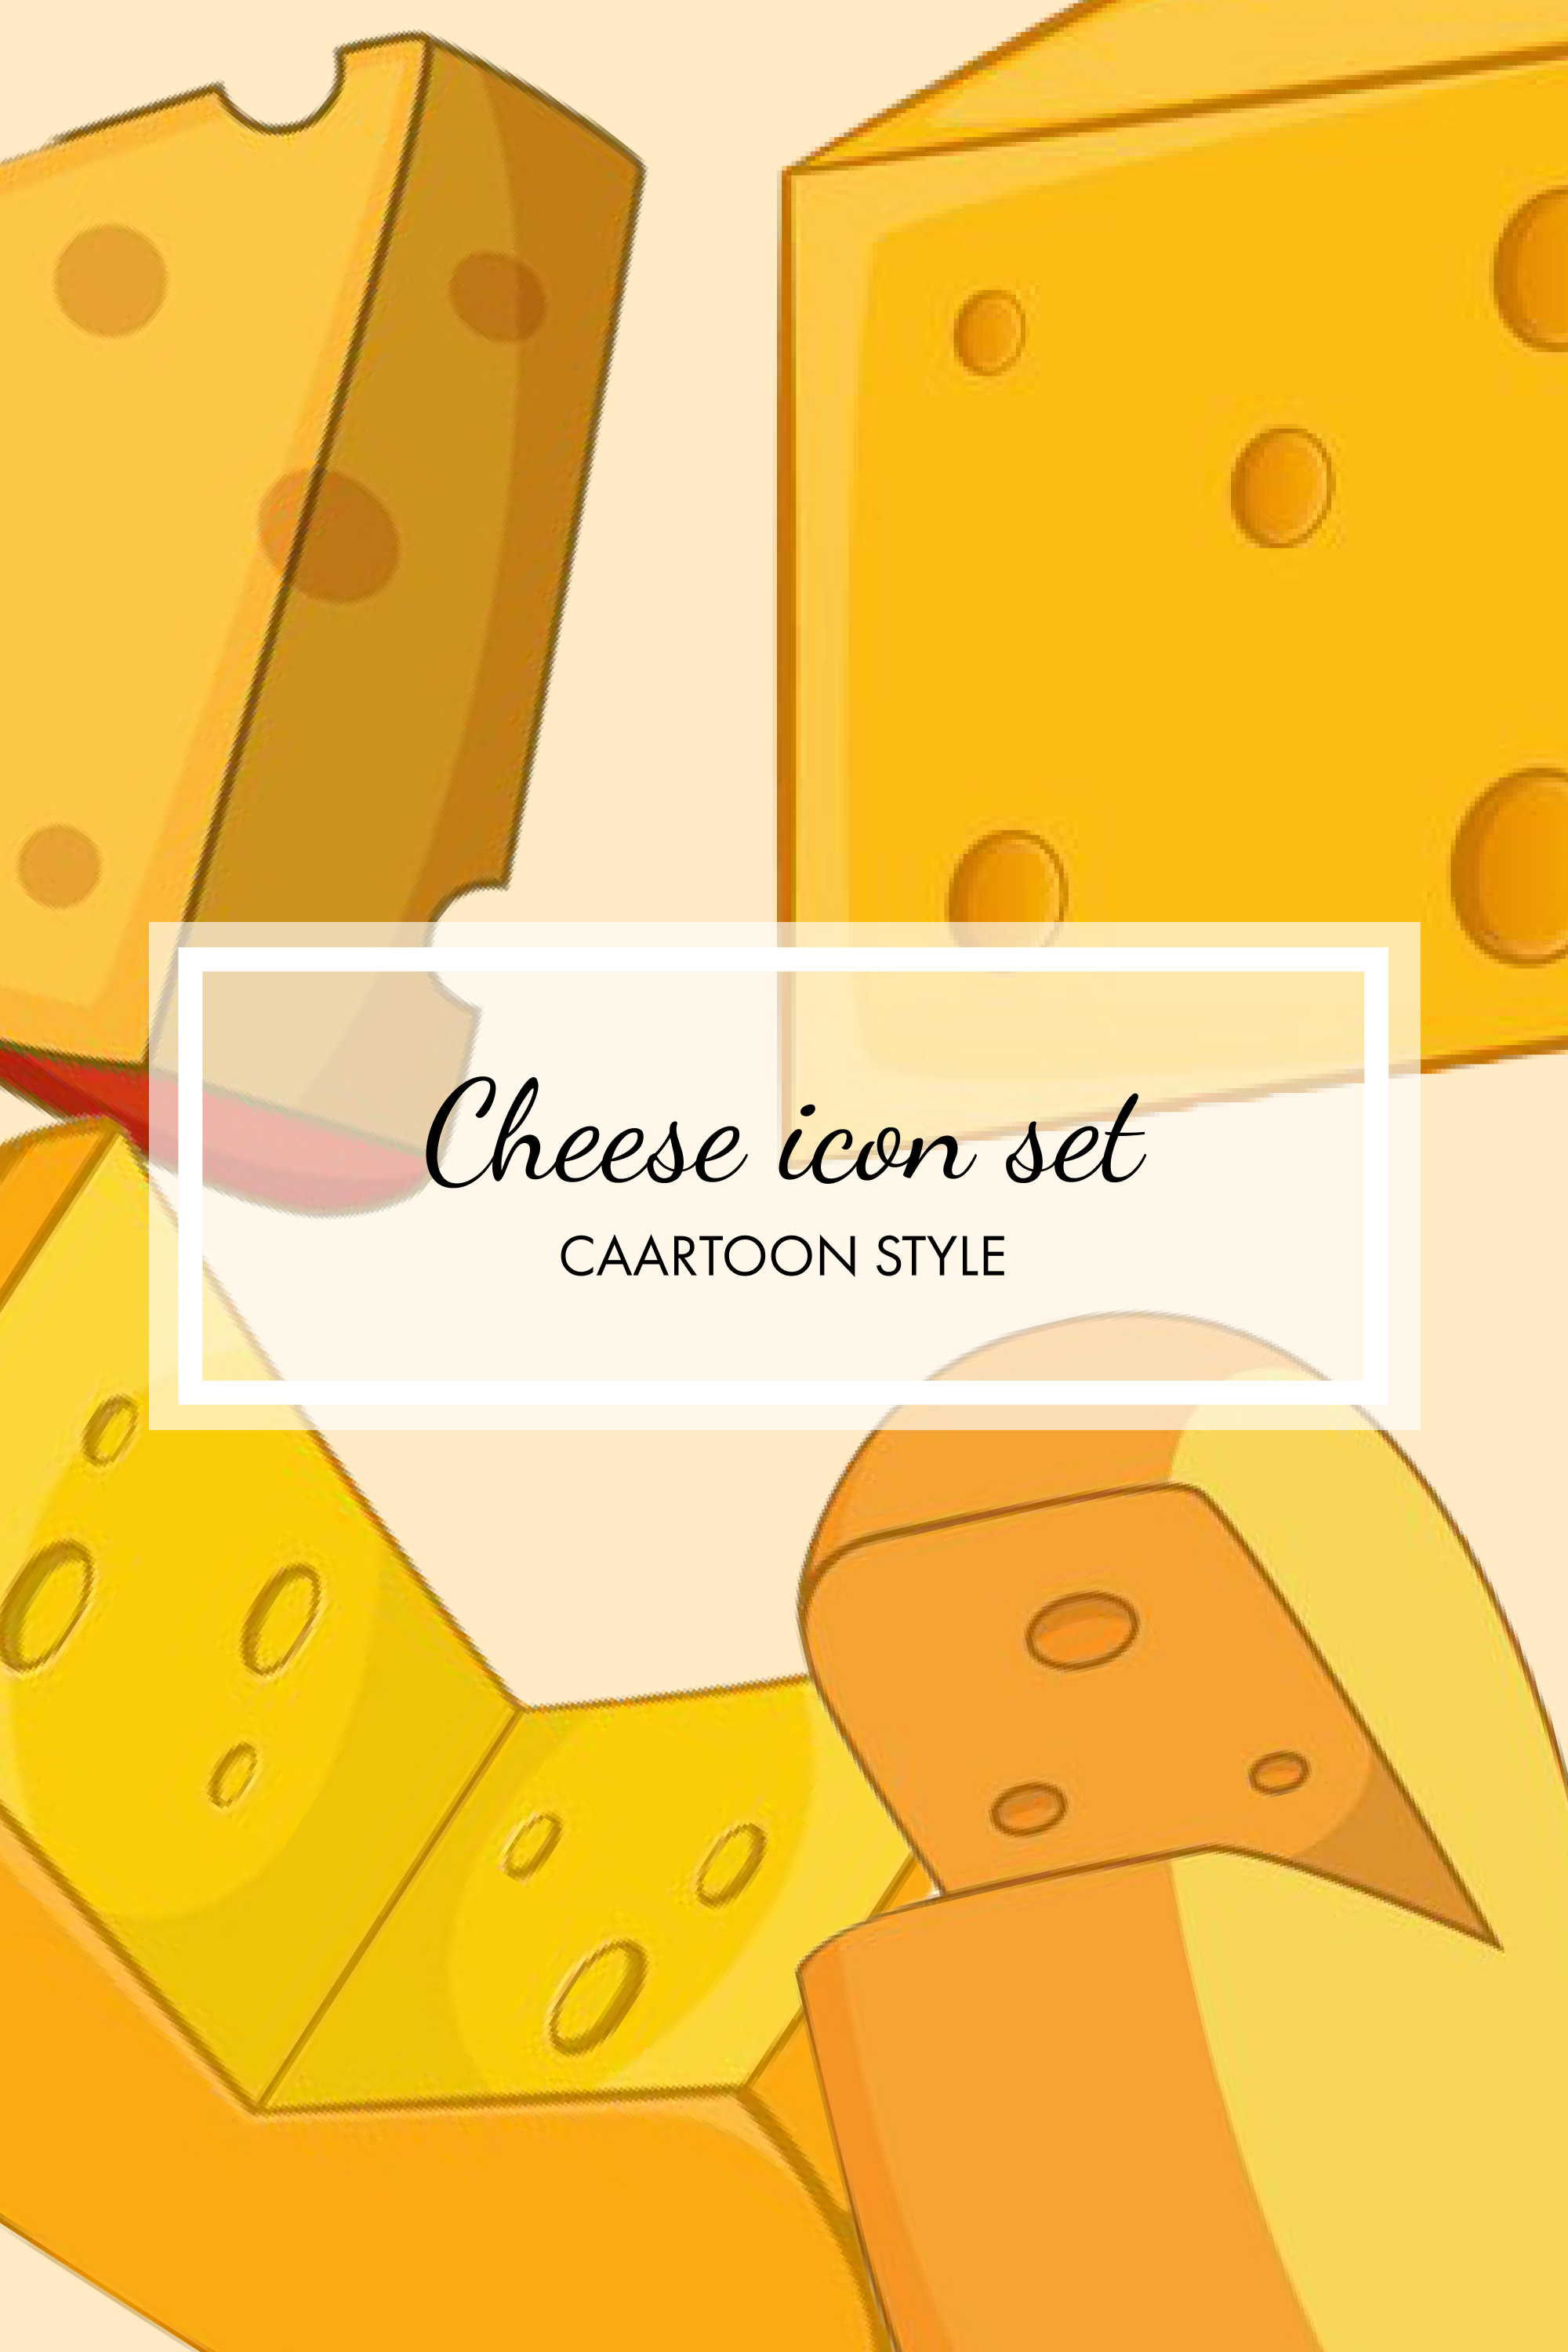 Cartoon image of pieces of hard cheese.